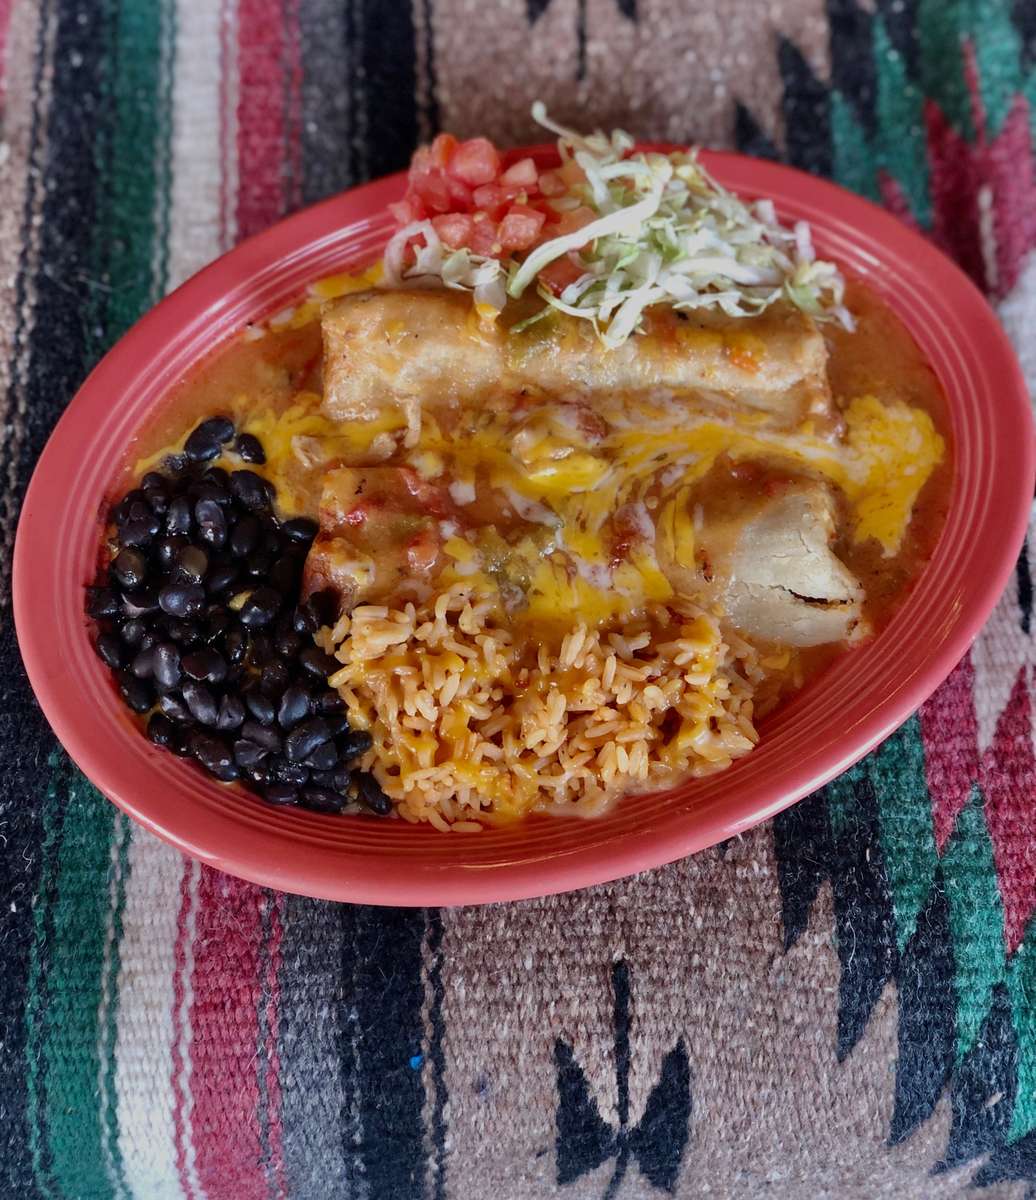 How to Serve Smothered Tamales with Chili